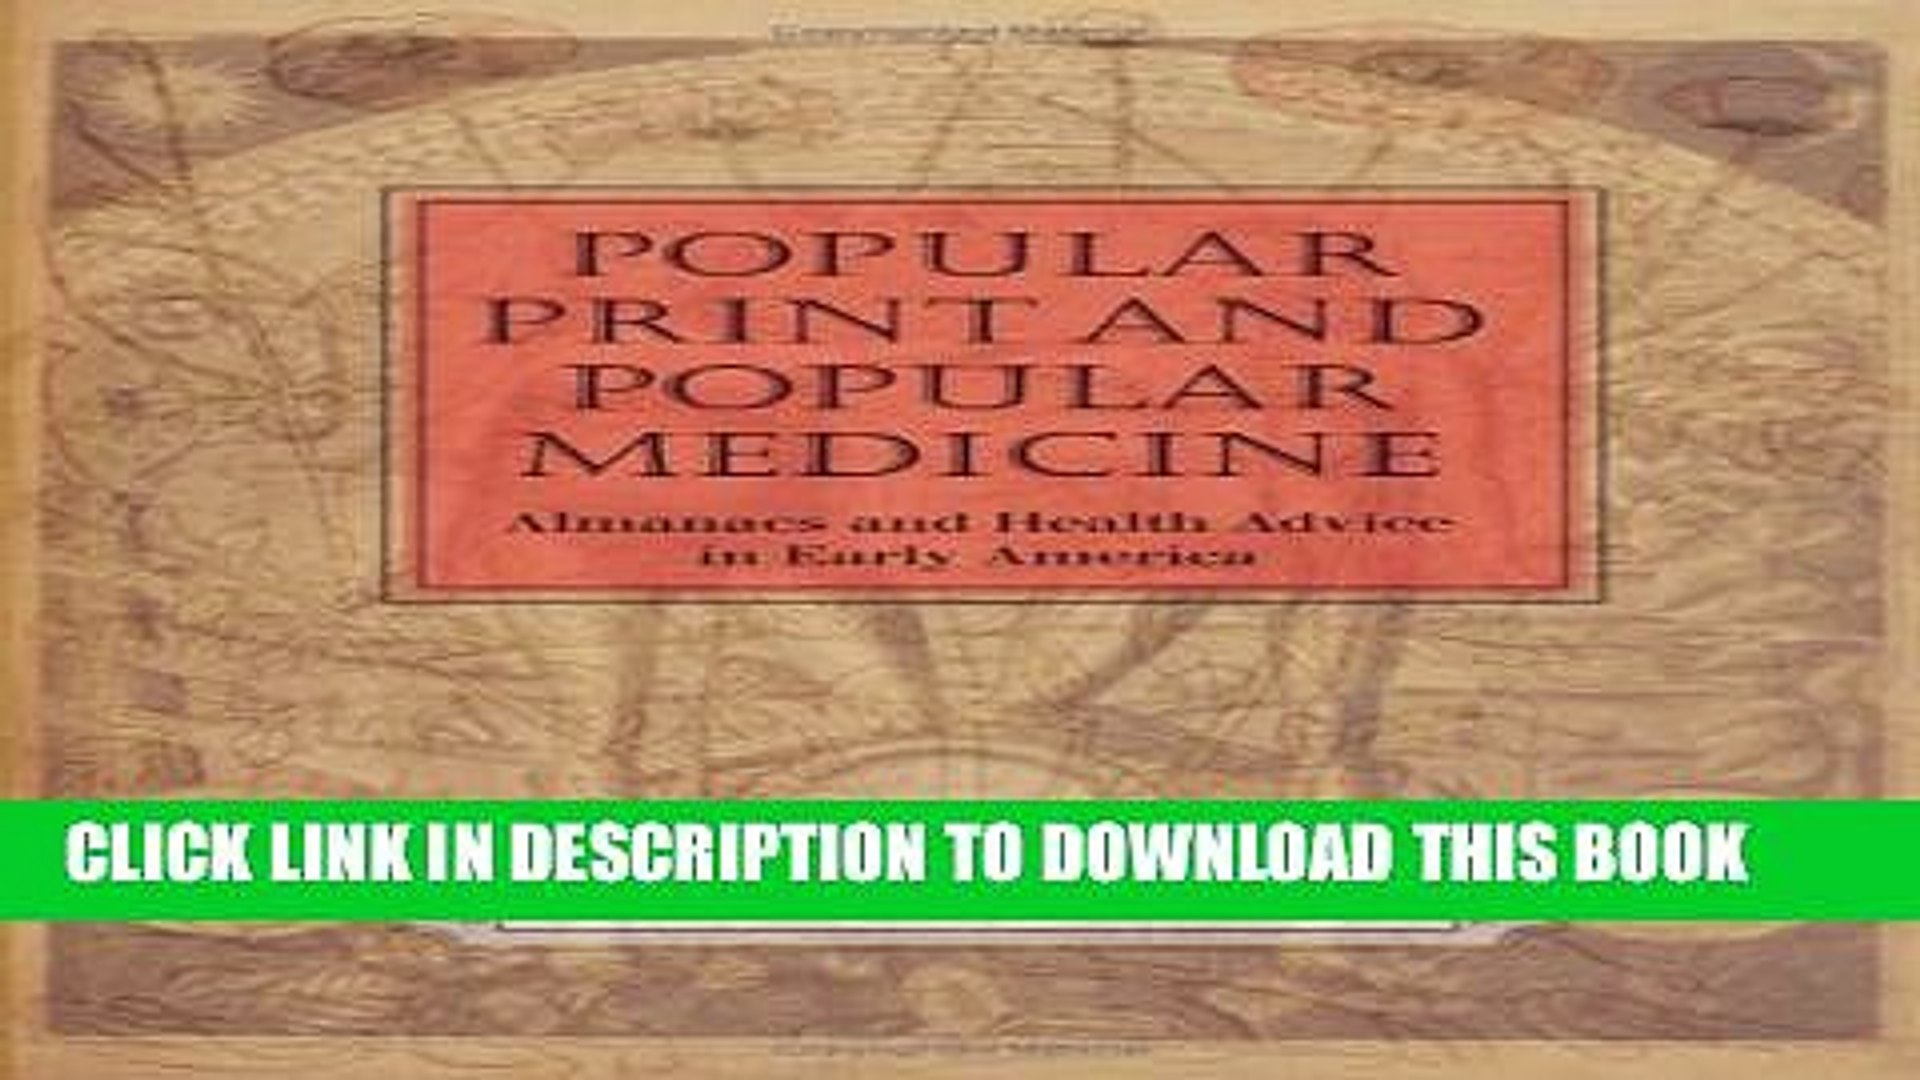 Collection Book Popular Print and Popular Medicine: Almanacs and Health Advice in Early America